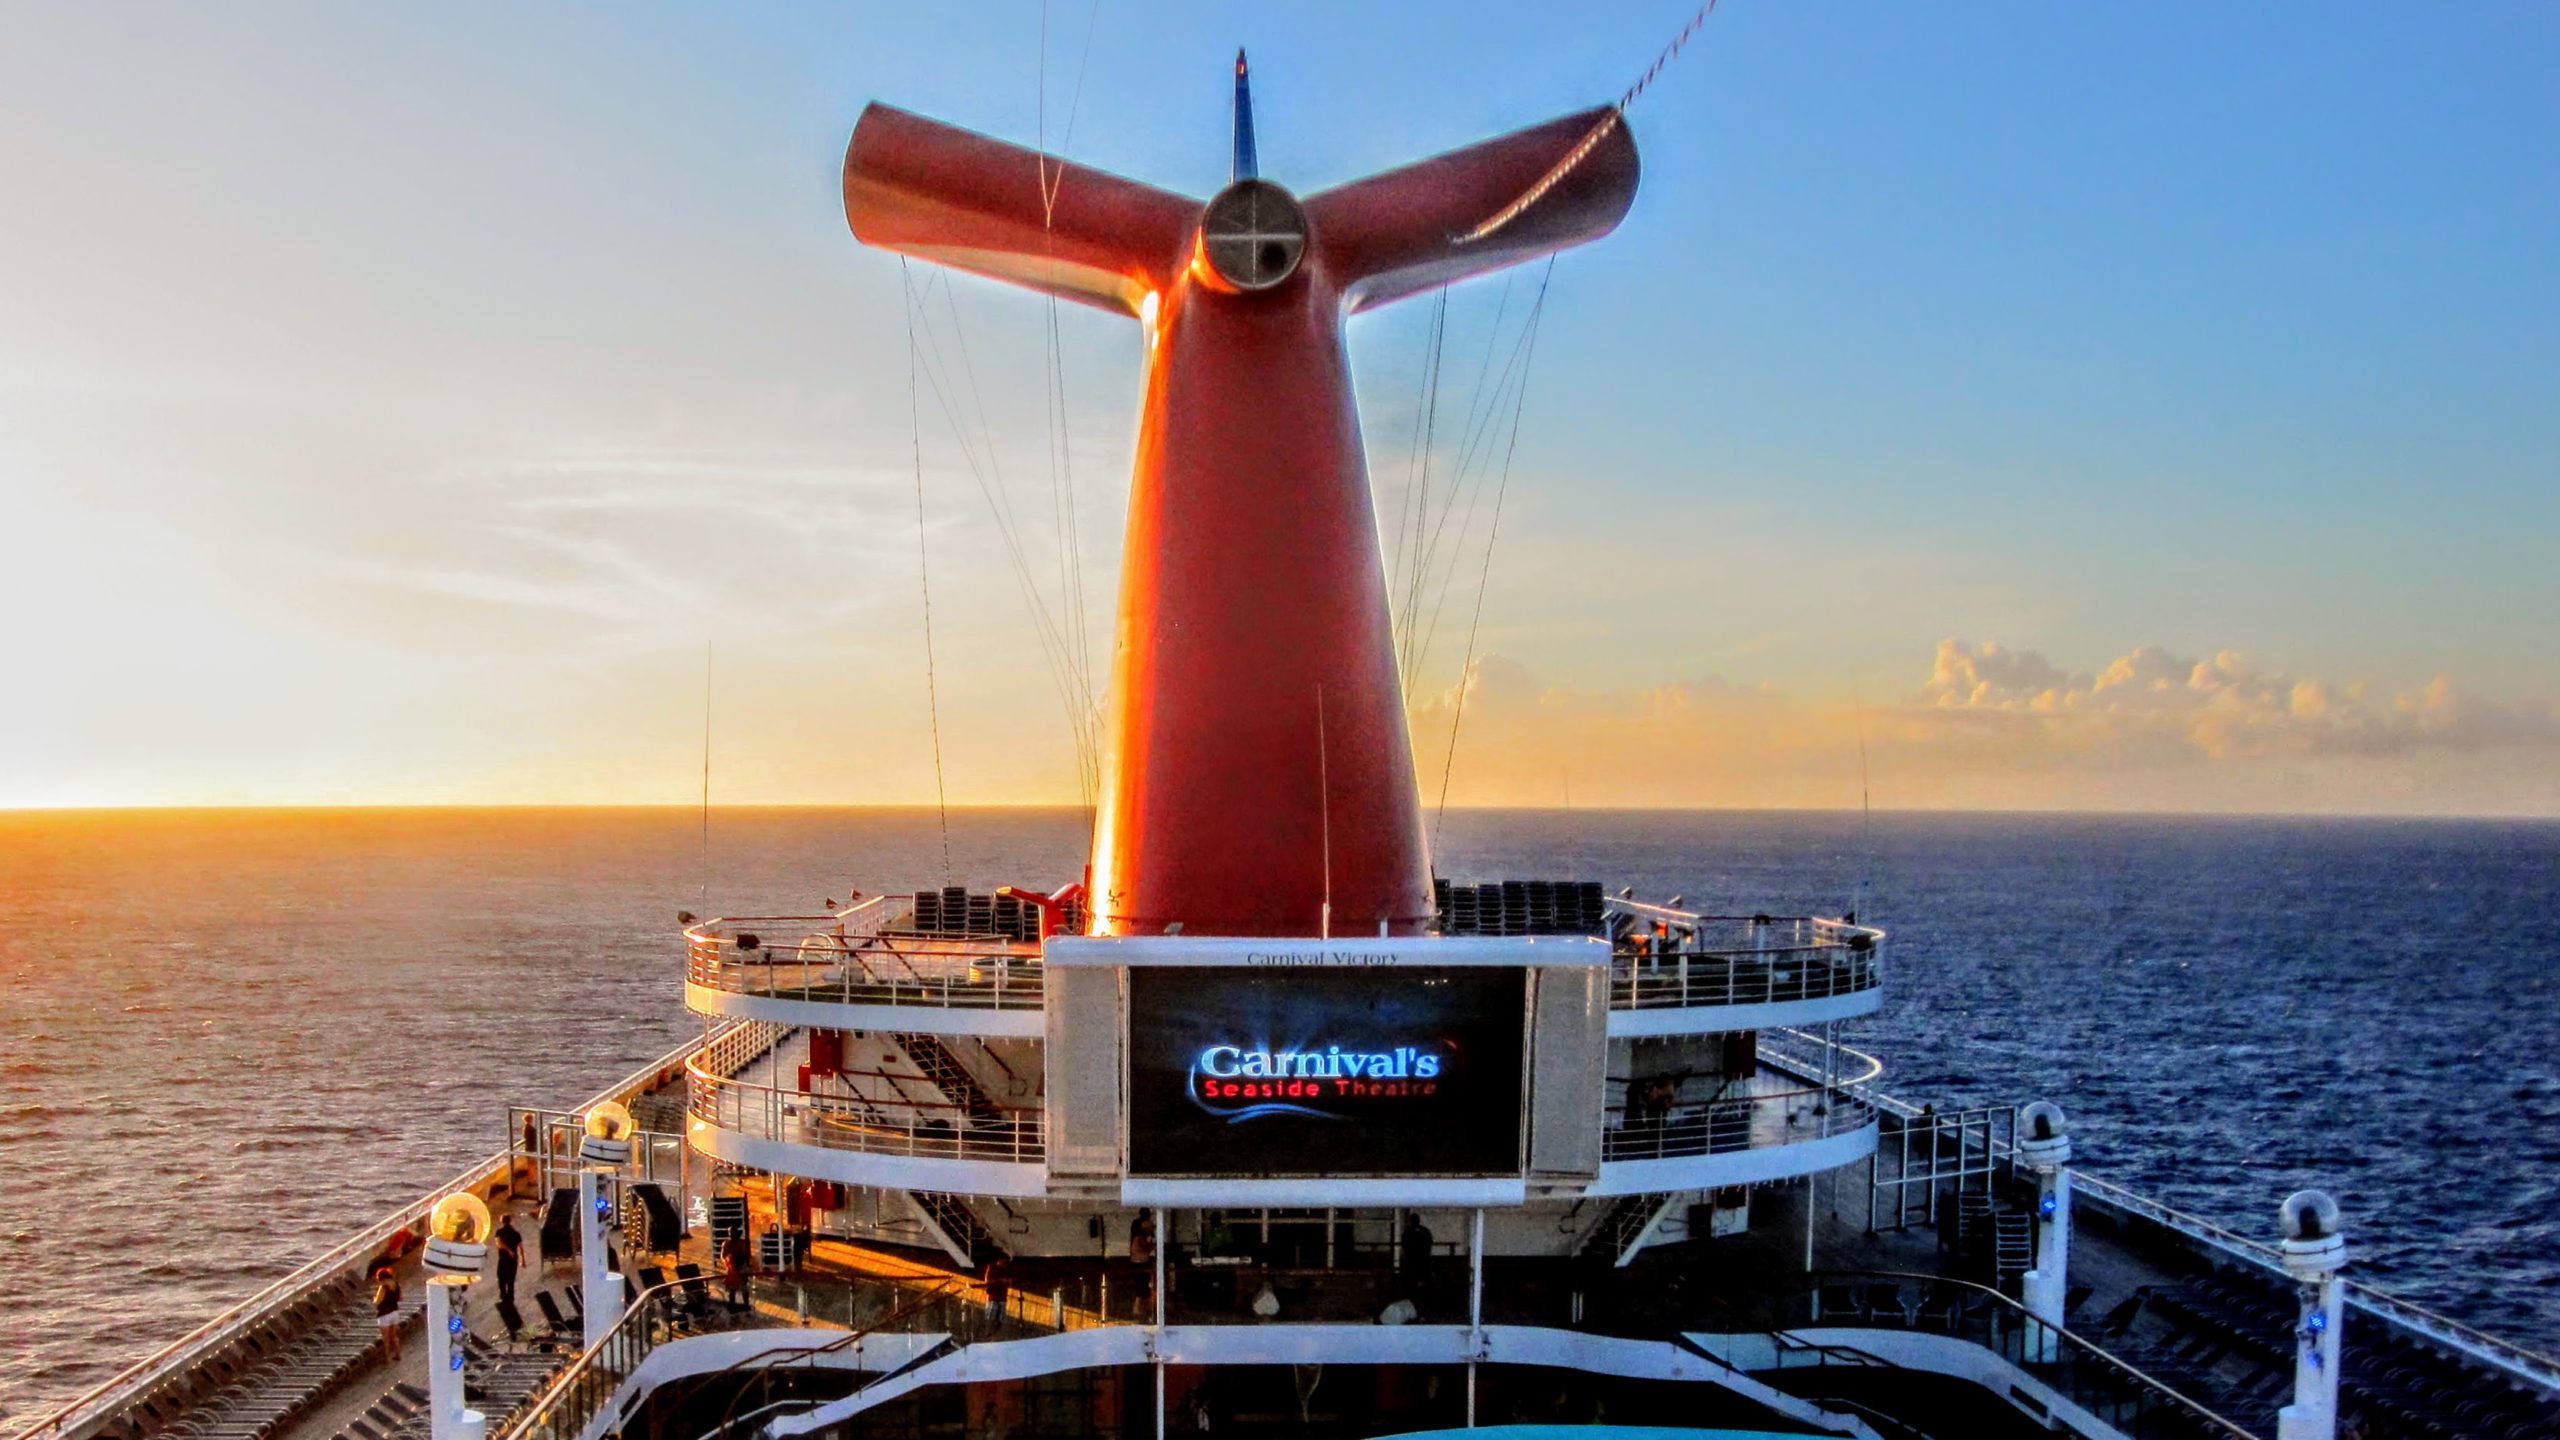 Carnival Partners with BetMGM to Offer Cruise Ship Gaming